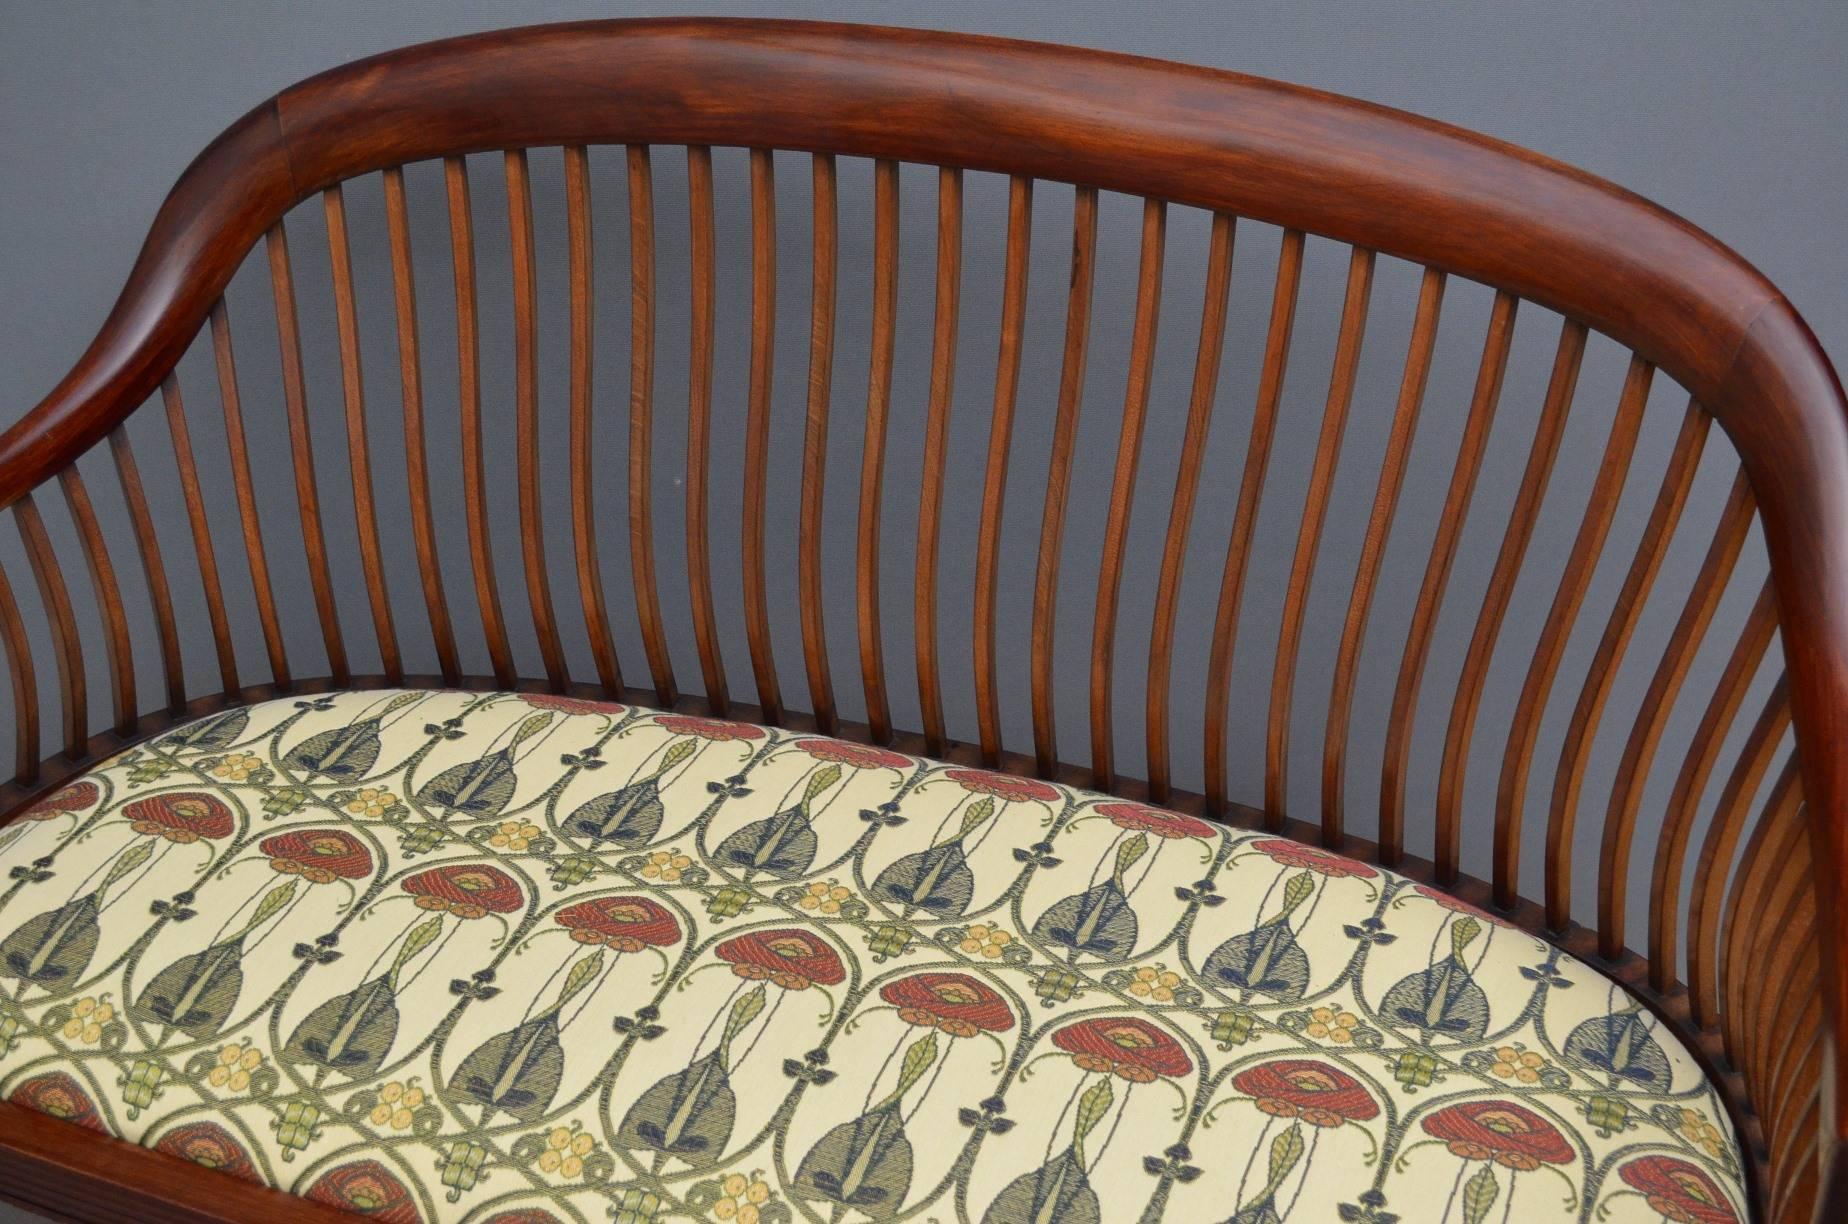 K0247 stylish Arts & Crafts settee, having round top rails with curved slats below, drop in seat and reeded front rails, standing on turned and ringed legs. This sofa is in wonderful home ready condition, circa 1900
Measures: H 16”, H 32”, W 42”, D